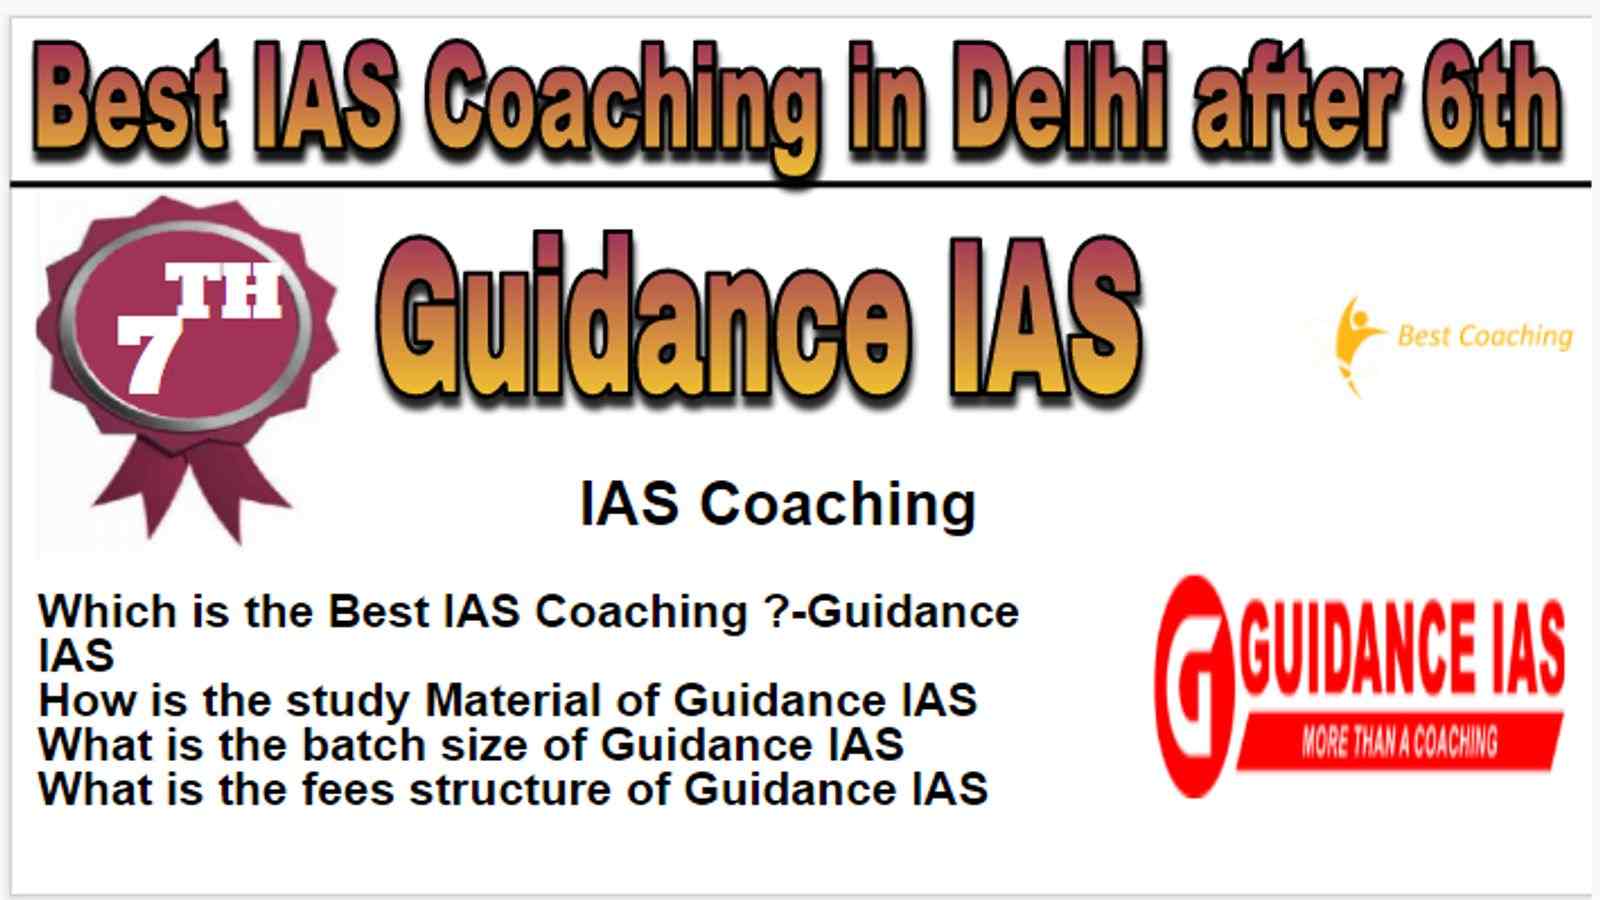 Rank 7 Best IAS coaching in Delhi after 6th